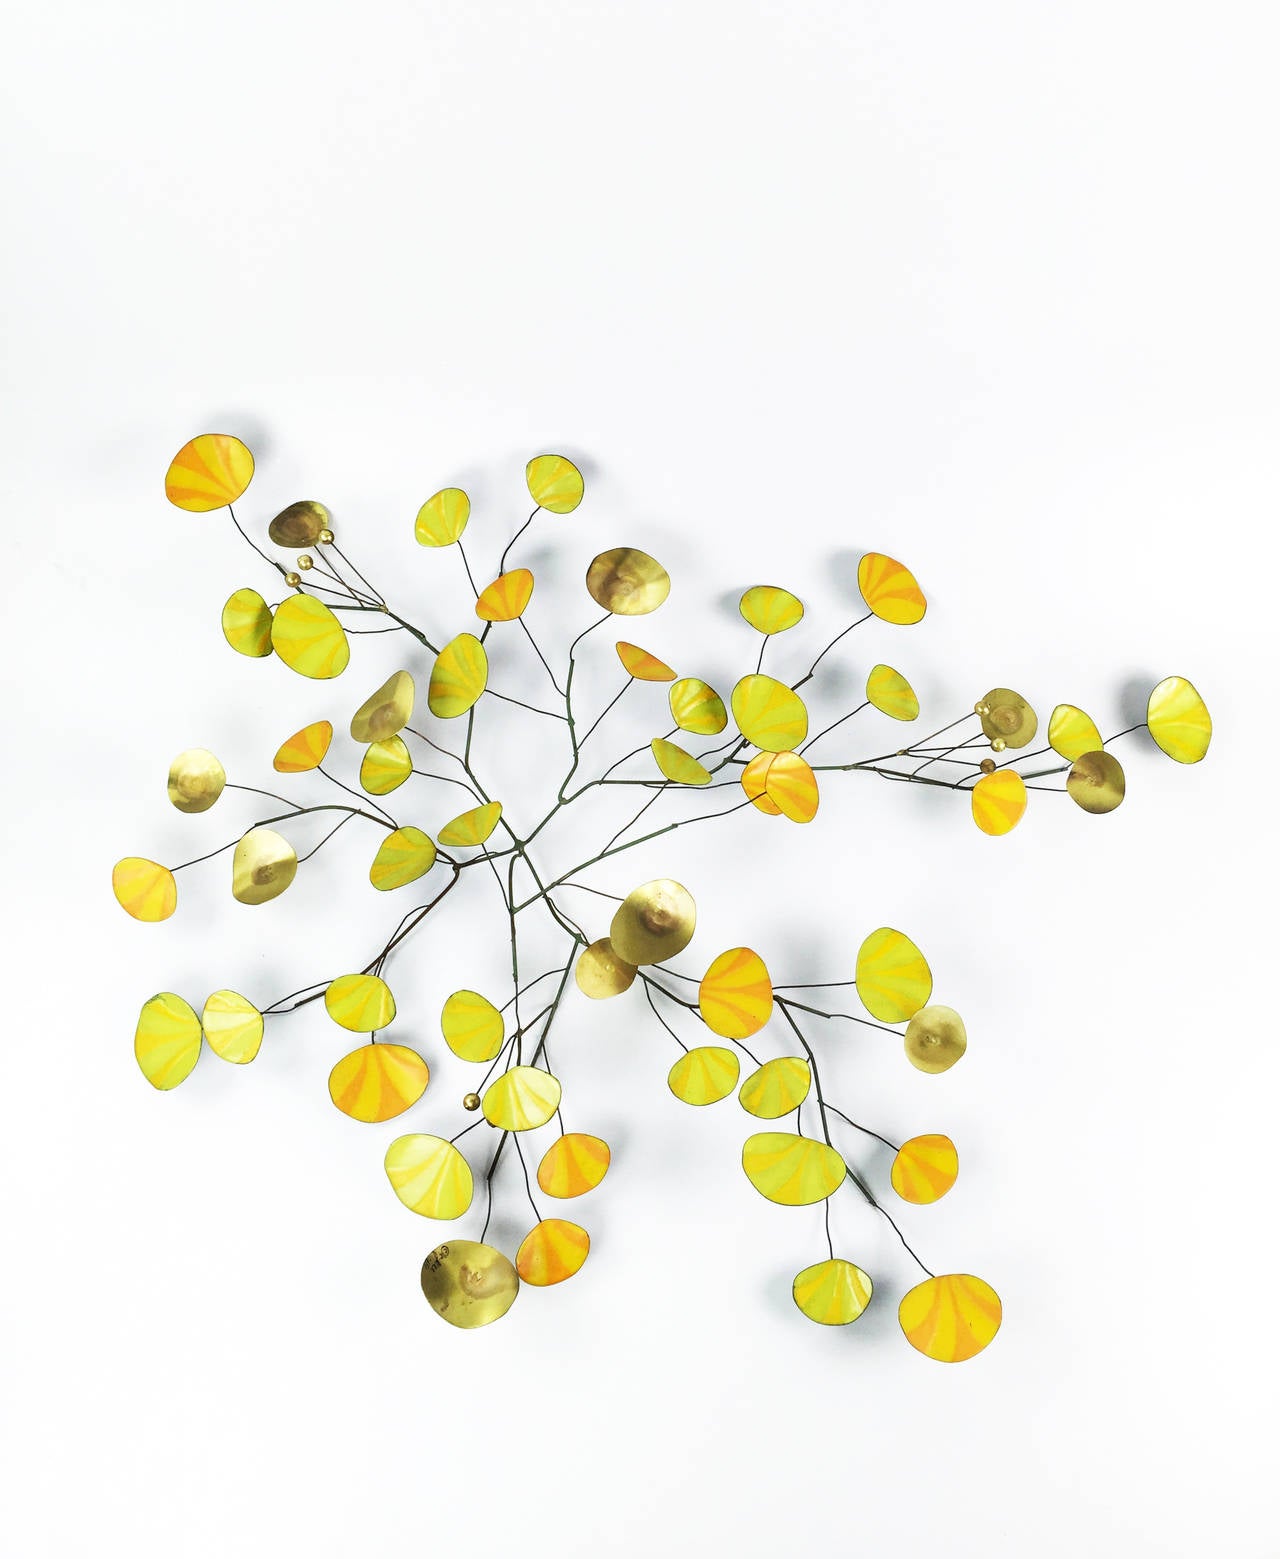 Lovely enamel yellow and orange striped leaves on brass with a few brass berry clusters. Vibrant and refined.